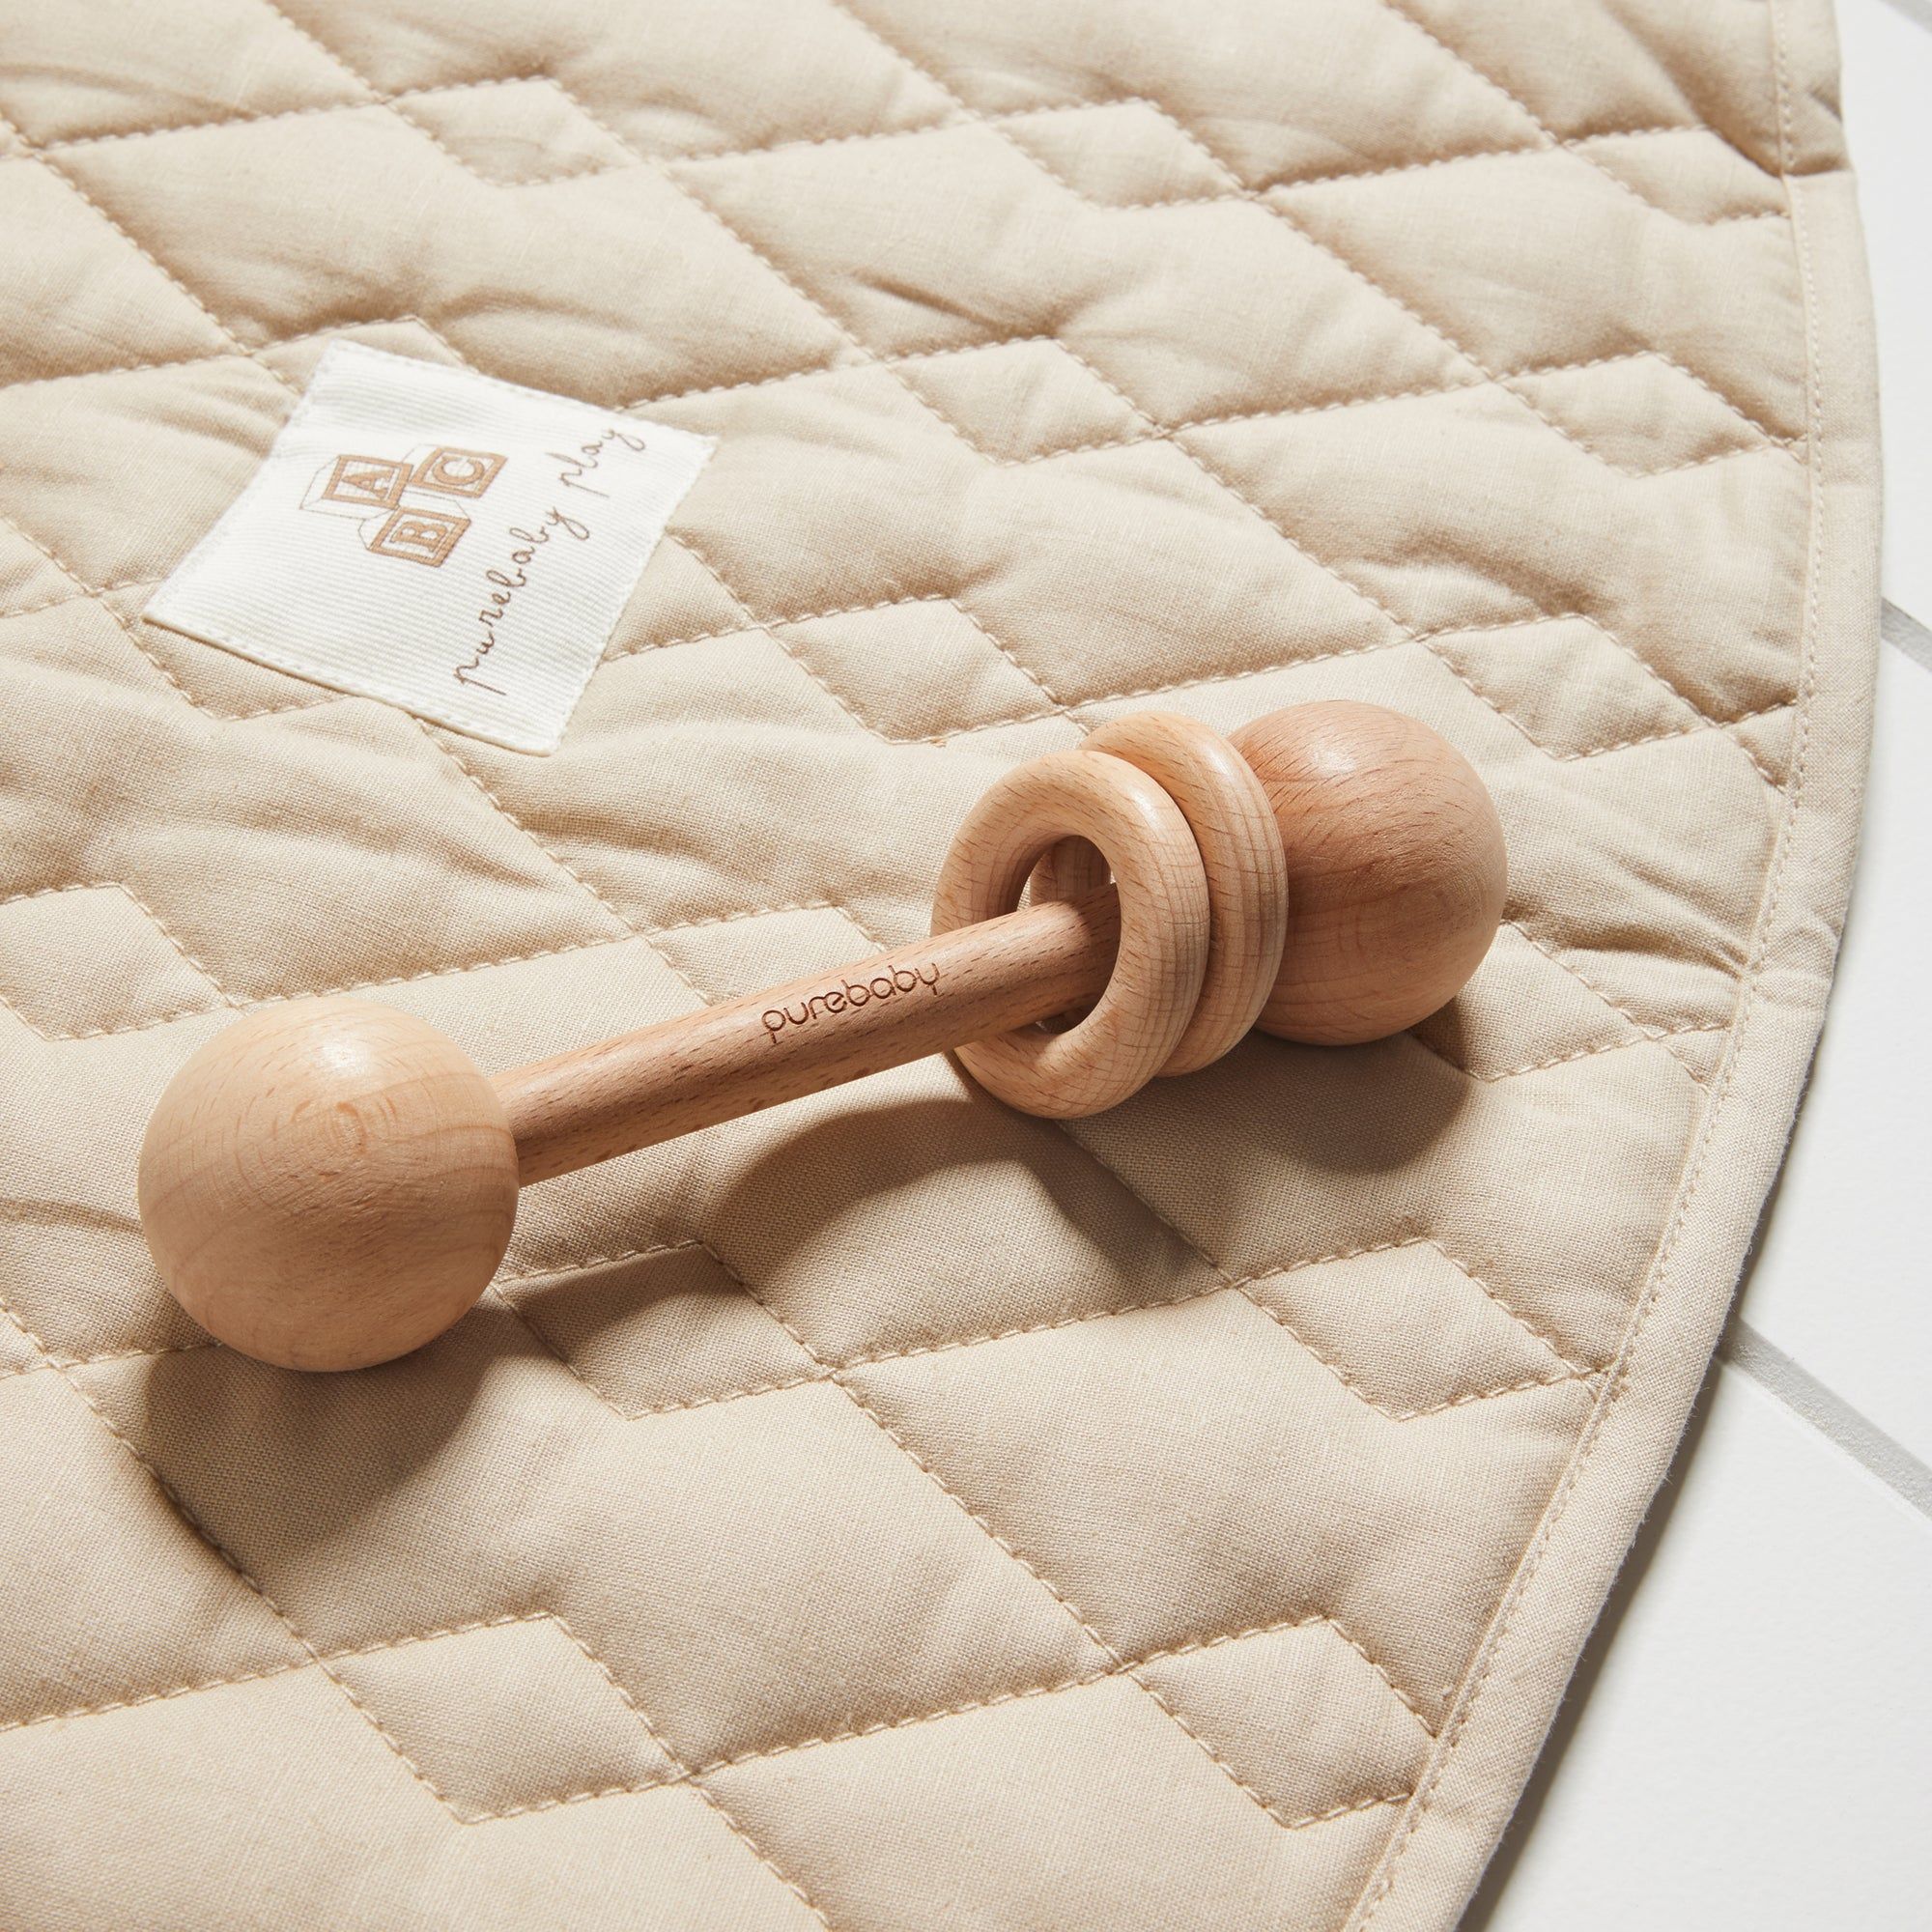 Wooden rattle laying on play mat